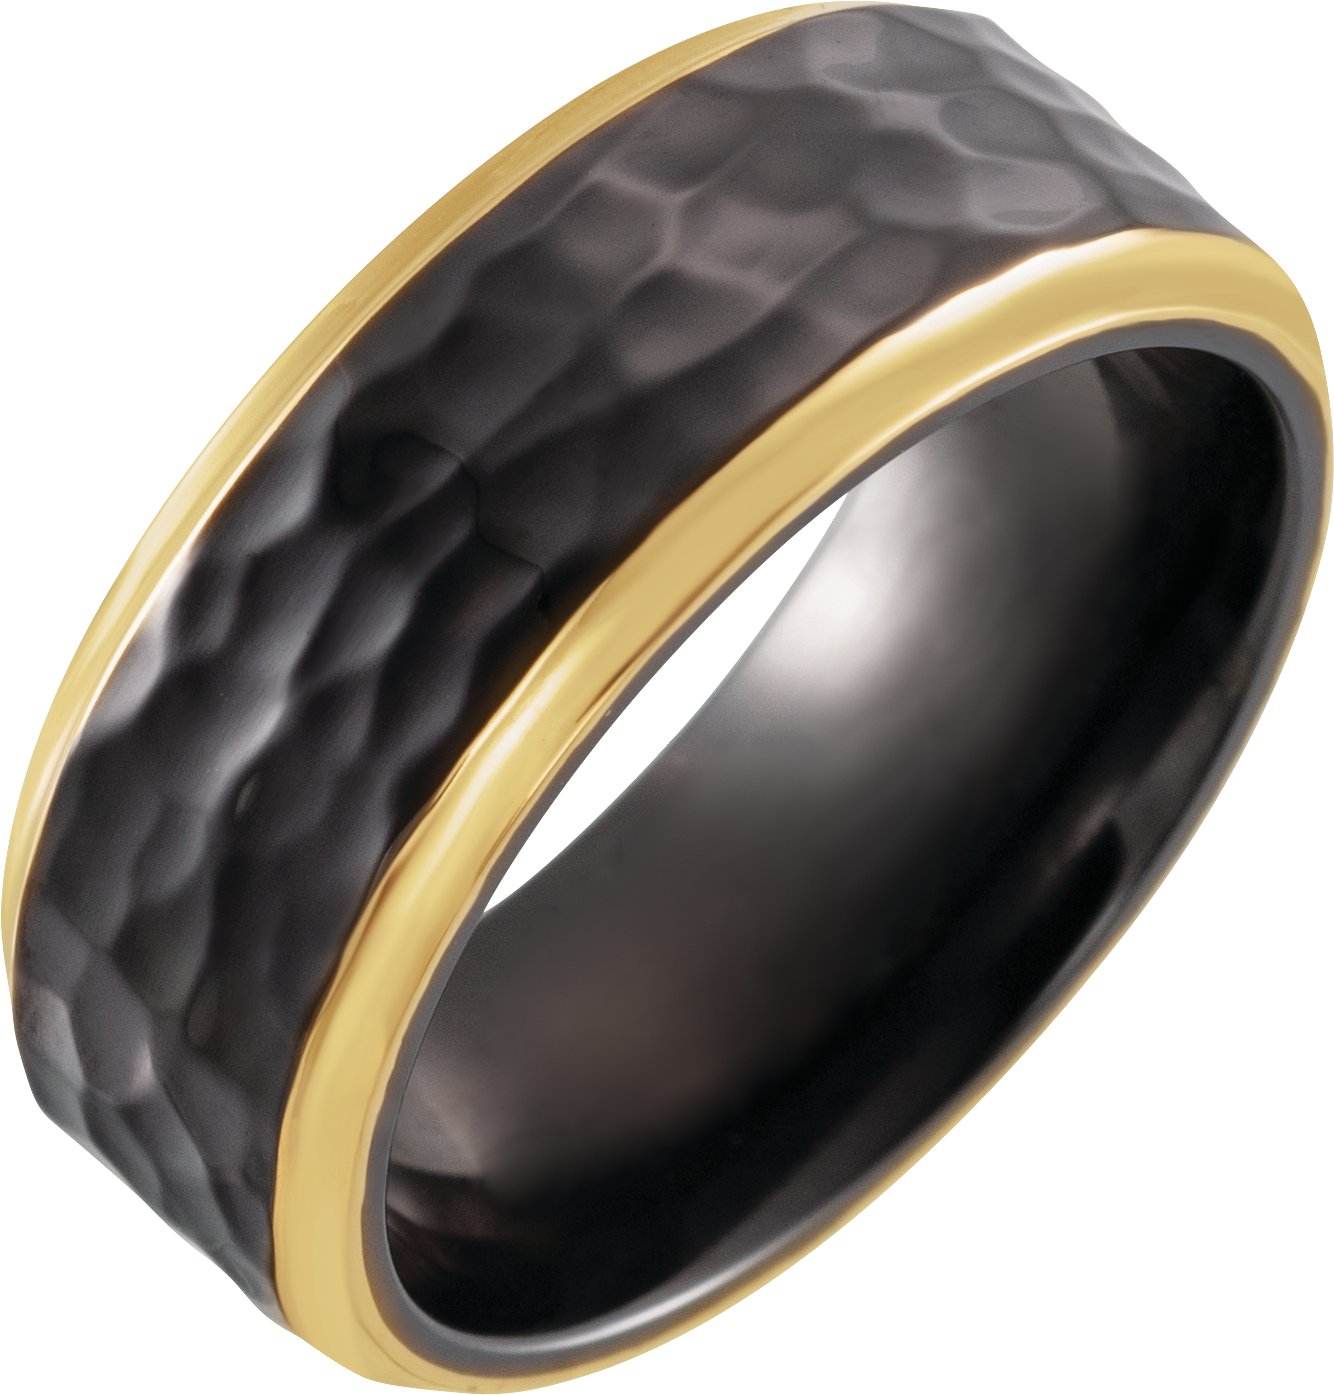 18K Yellow Gold PVD Black Titanium 8 mm Flat Size 6.5 Band with Hammer Finish